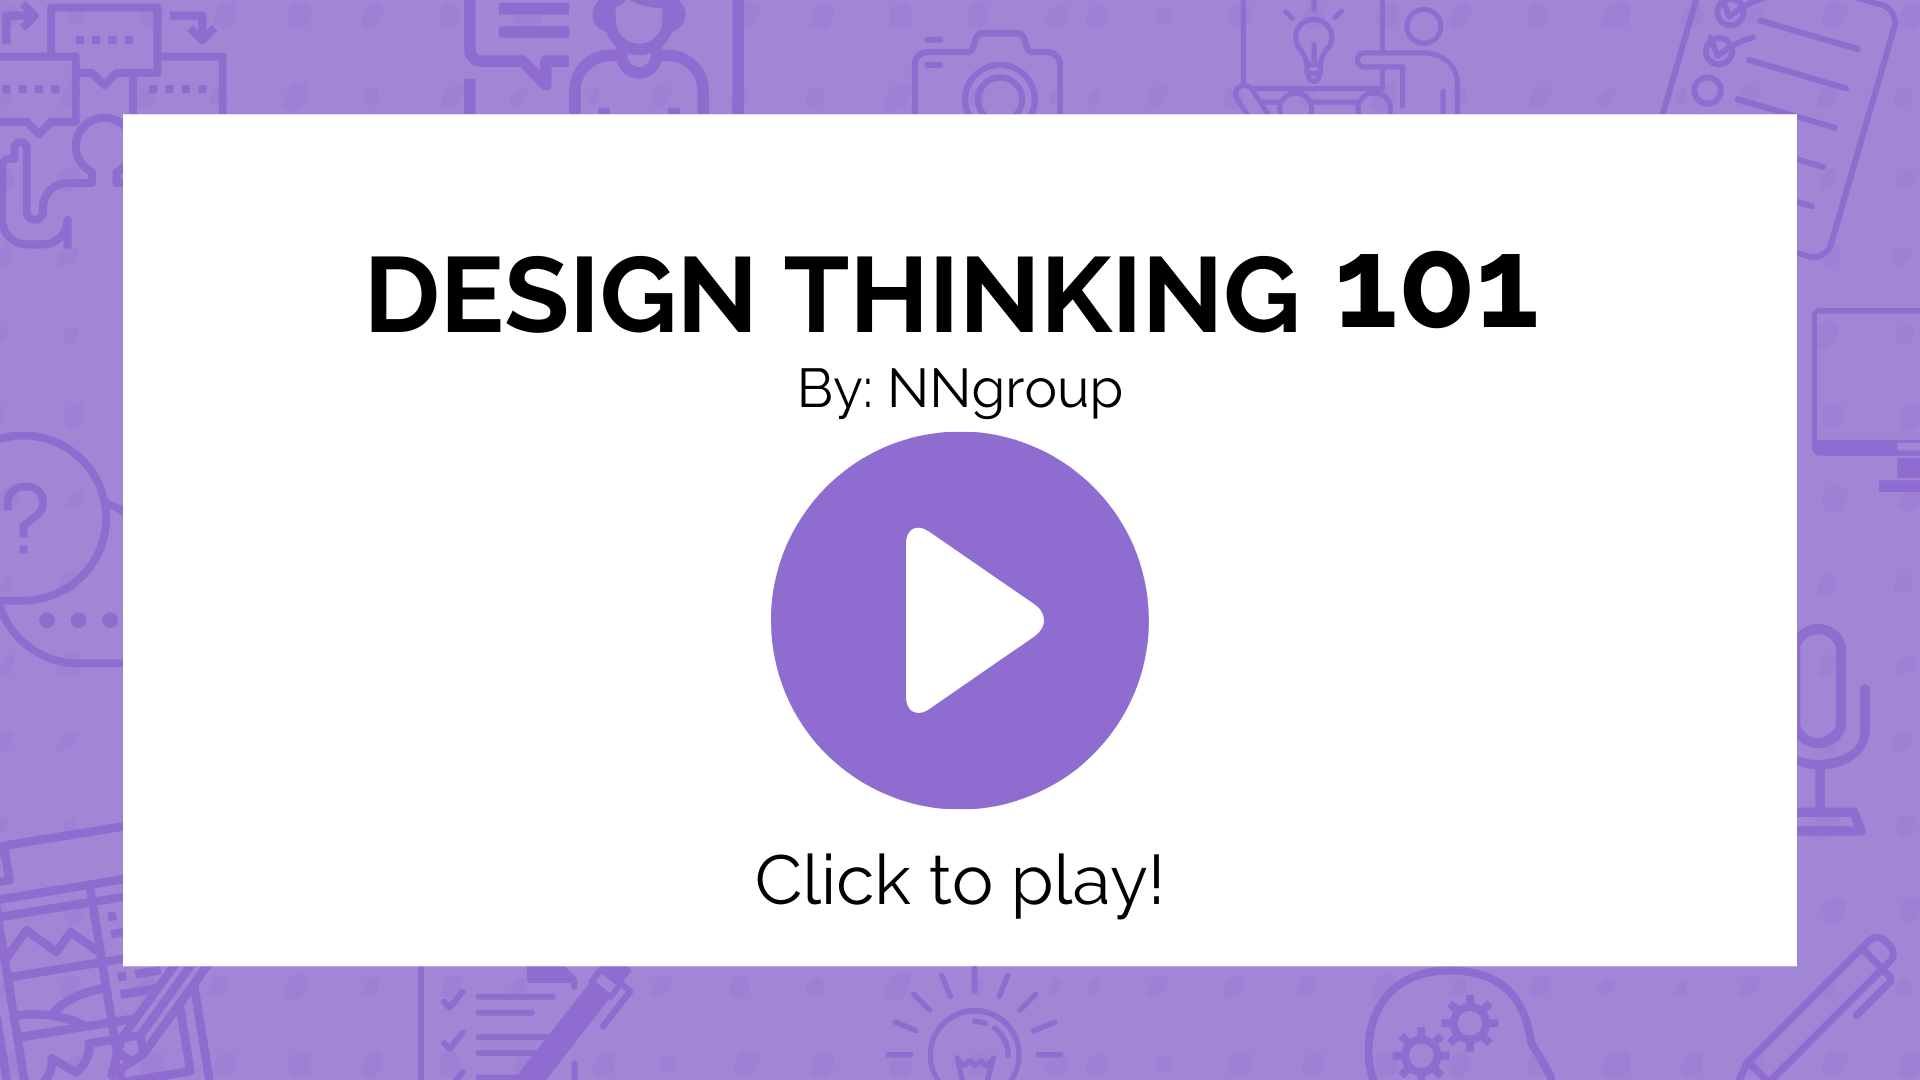 Click this image to open a YouTube video in a new tab, called Design Thinking 101